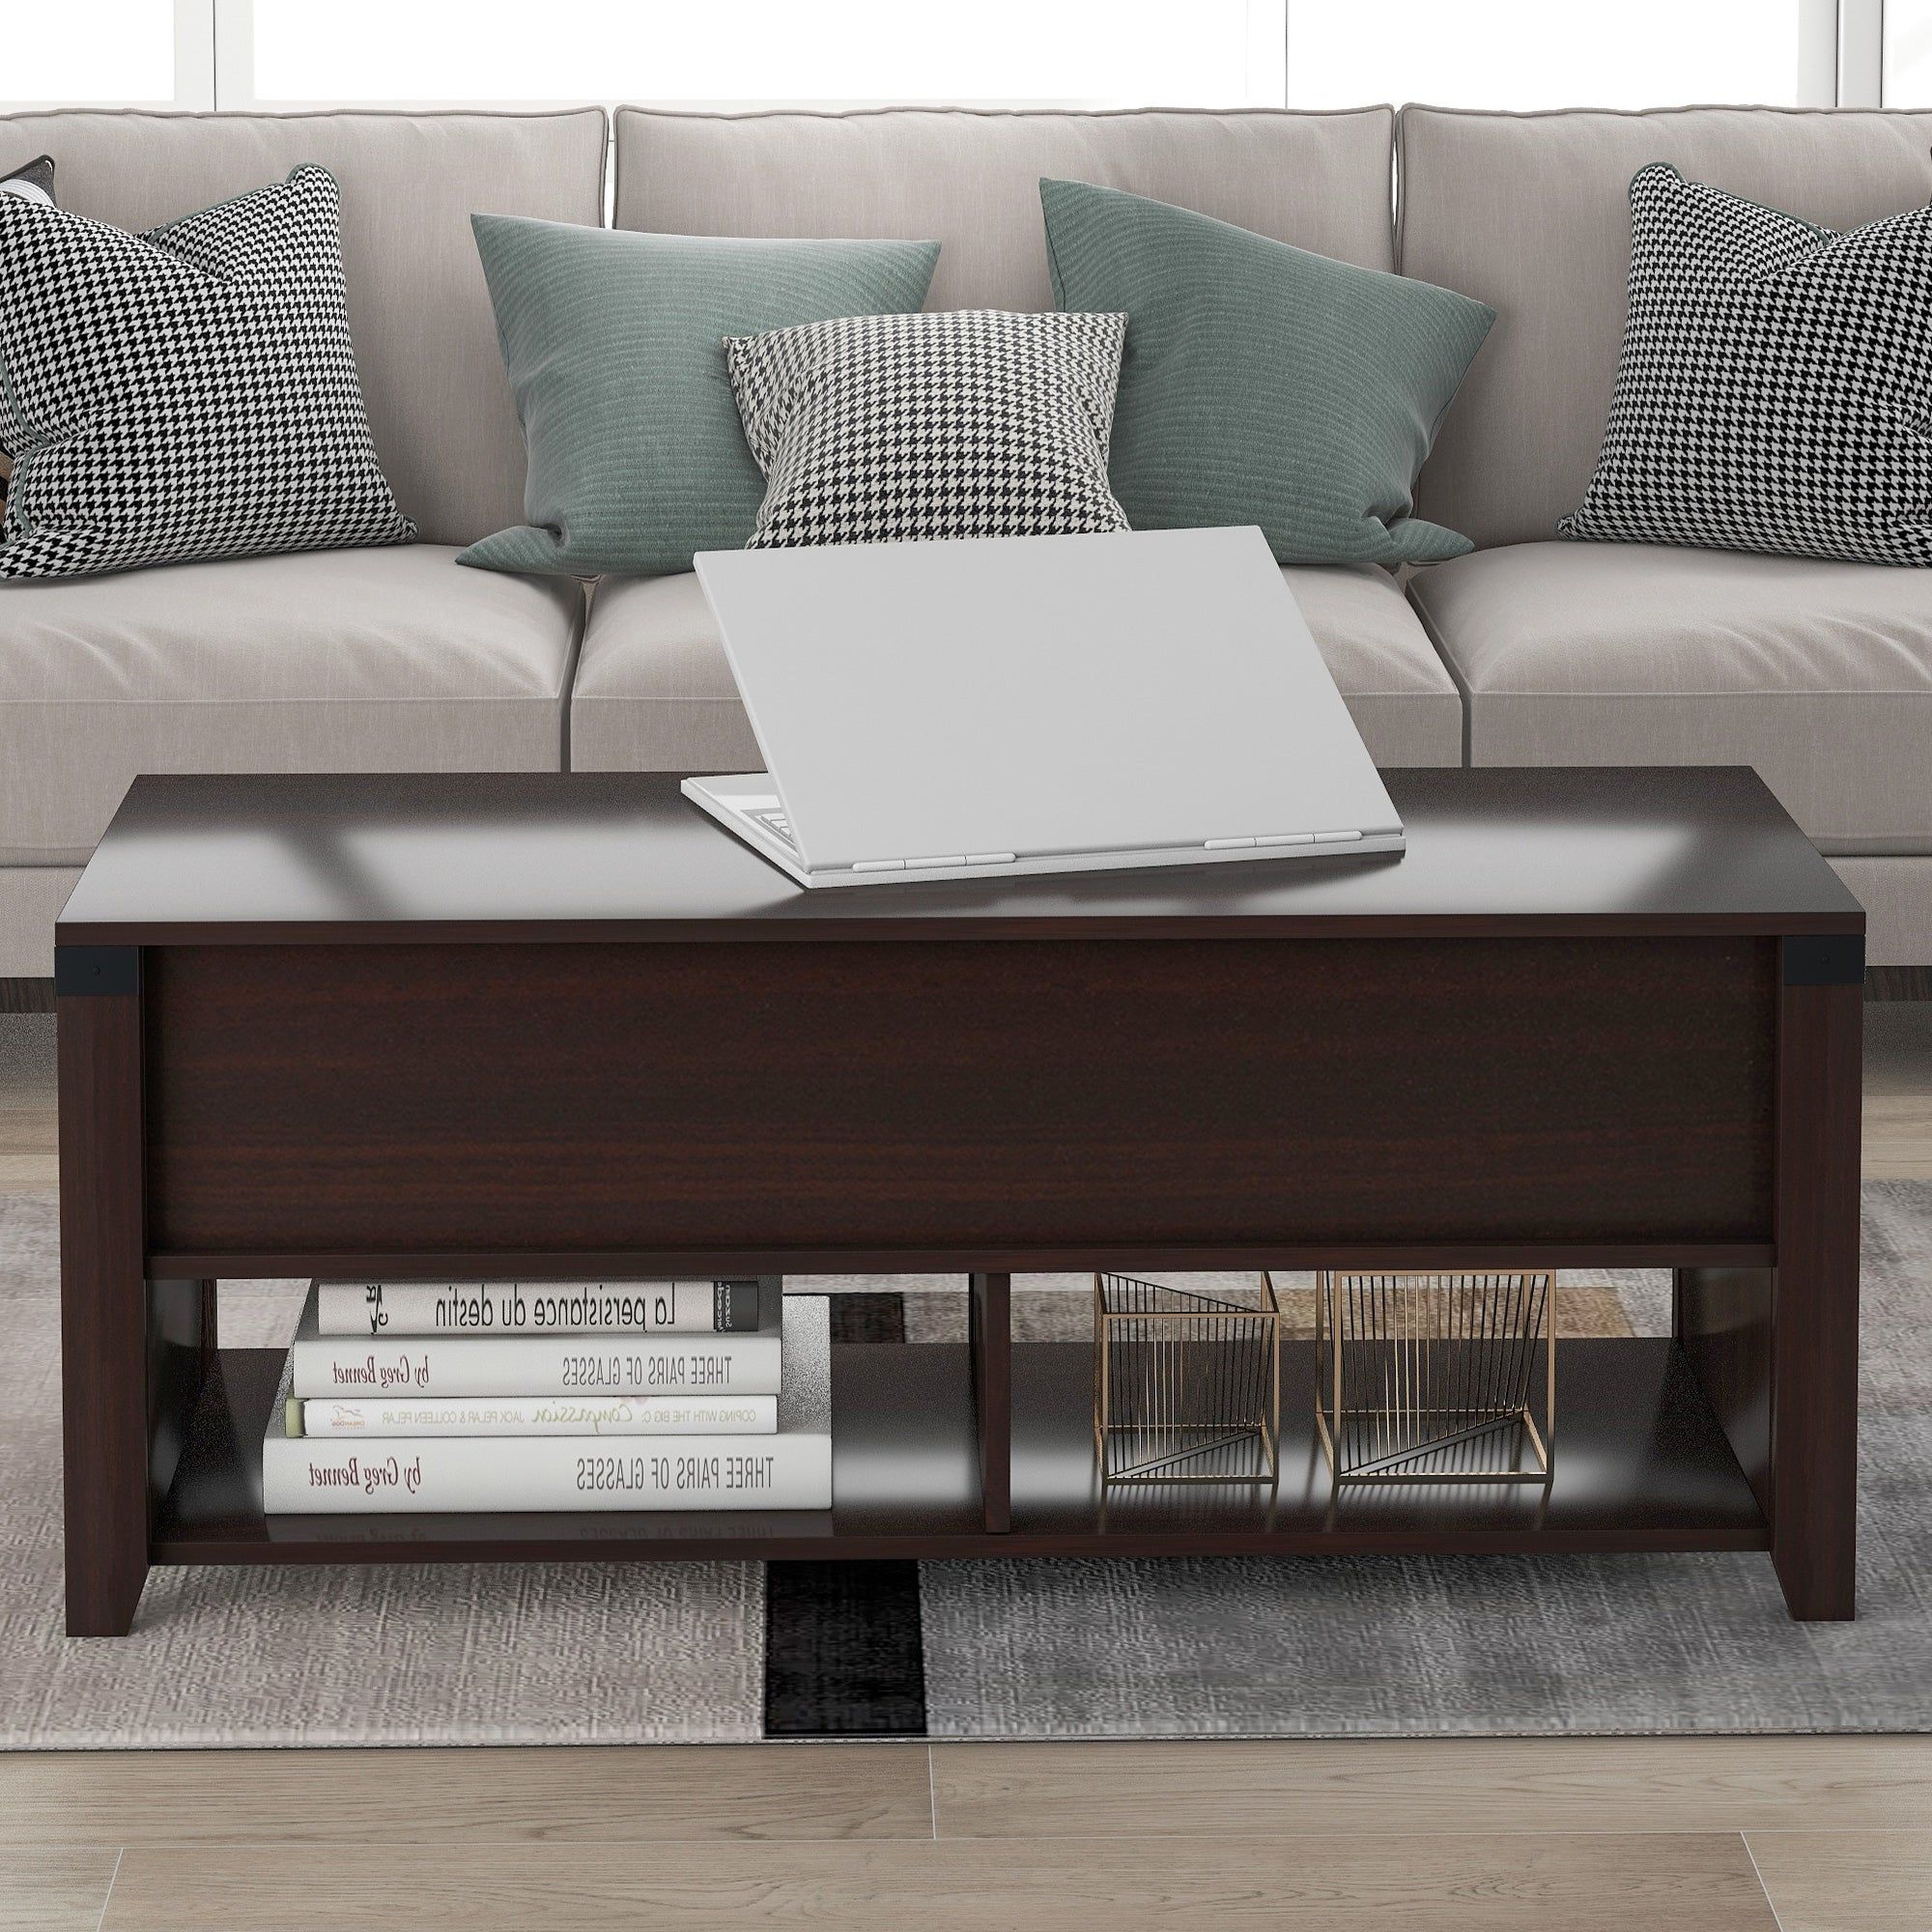 Multipurpose Coffee Table With Drawers ,open Shelf And Storage, Lifting Top  Table For Living Room – Overstock – 35406401 Pertaining To Most Recently Released Open Shelf Coffee Tables (View 7 of 20)